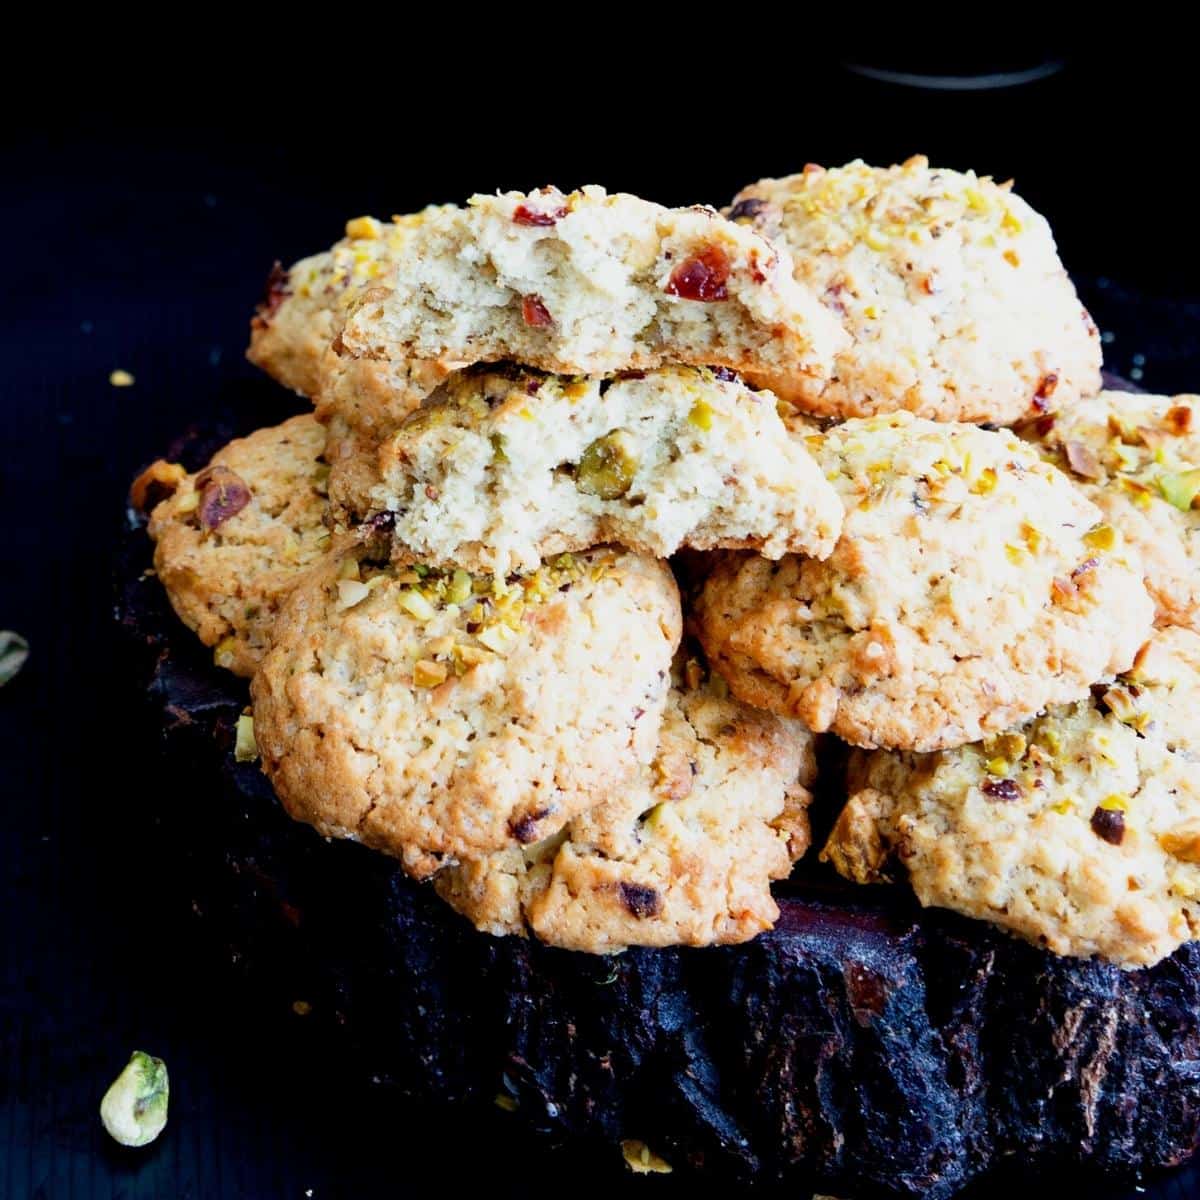 Cookies with pistachios and cranberries.